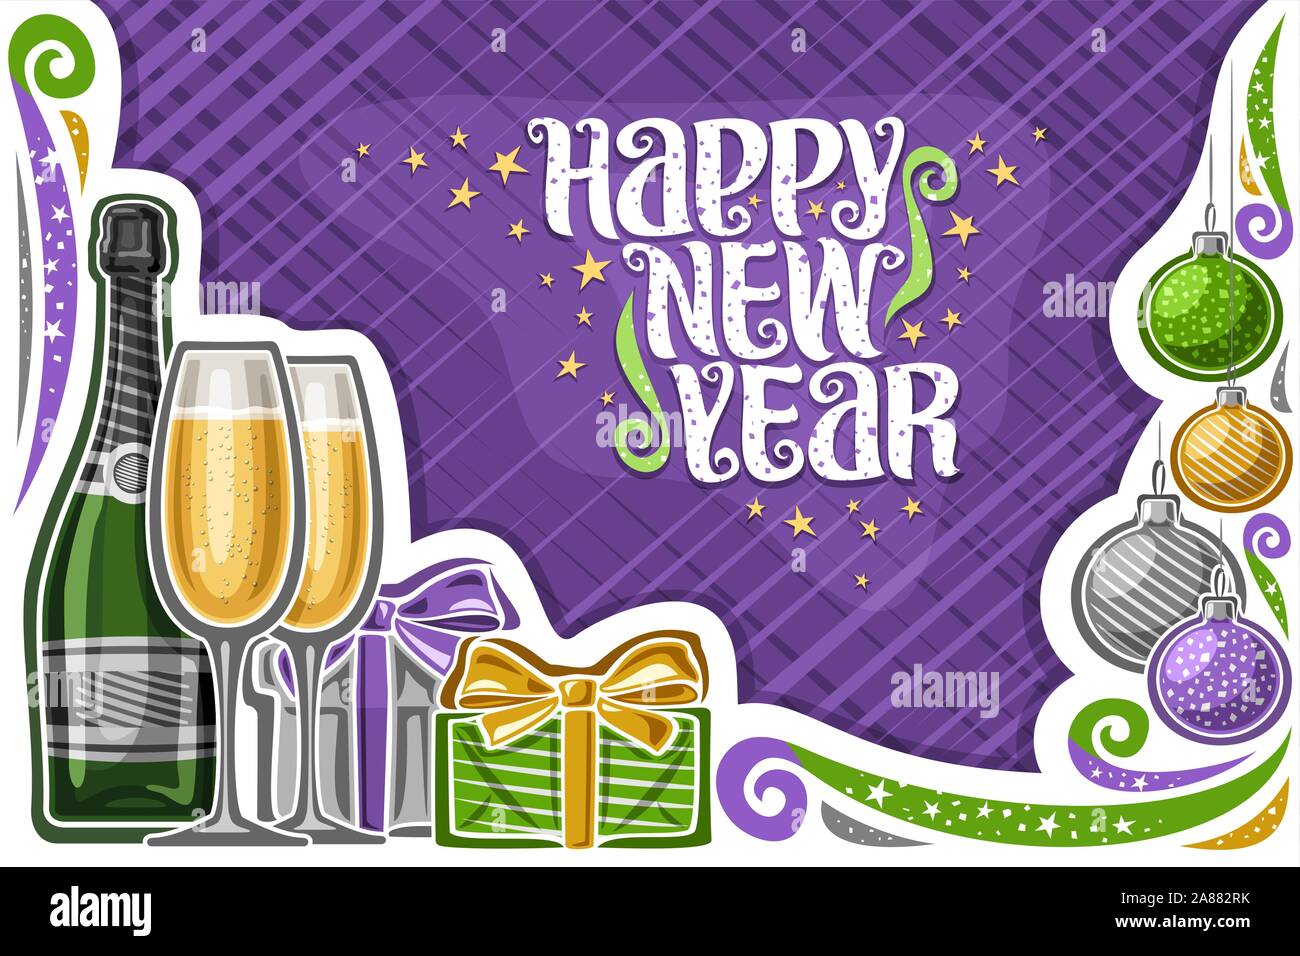 Vector greeting card for New Year, decorative voucher with original typeface for words happy new year, illustration of 2 flute wine glasses, bottle of Stock Vector